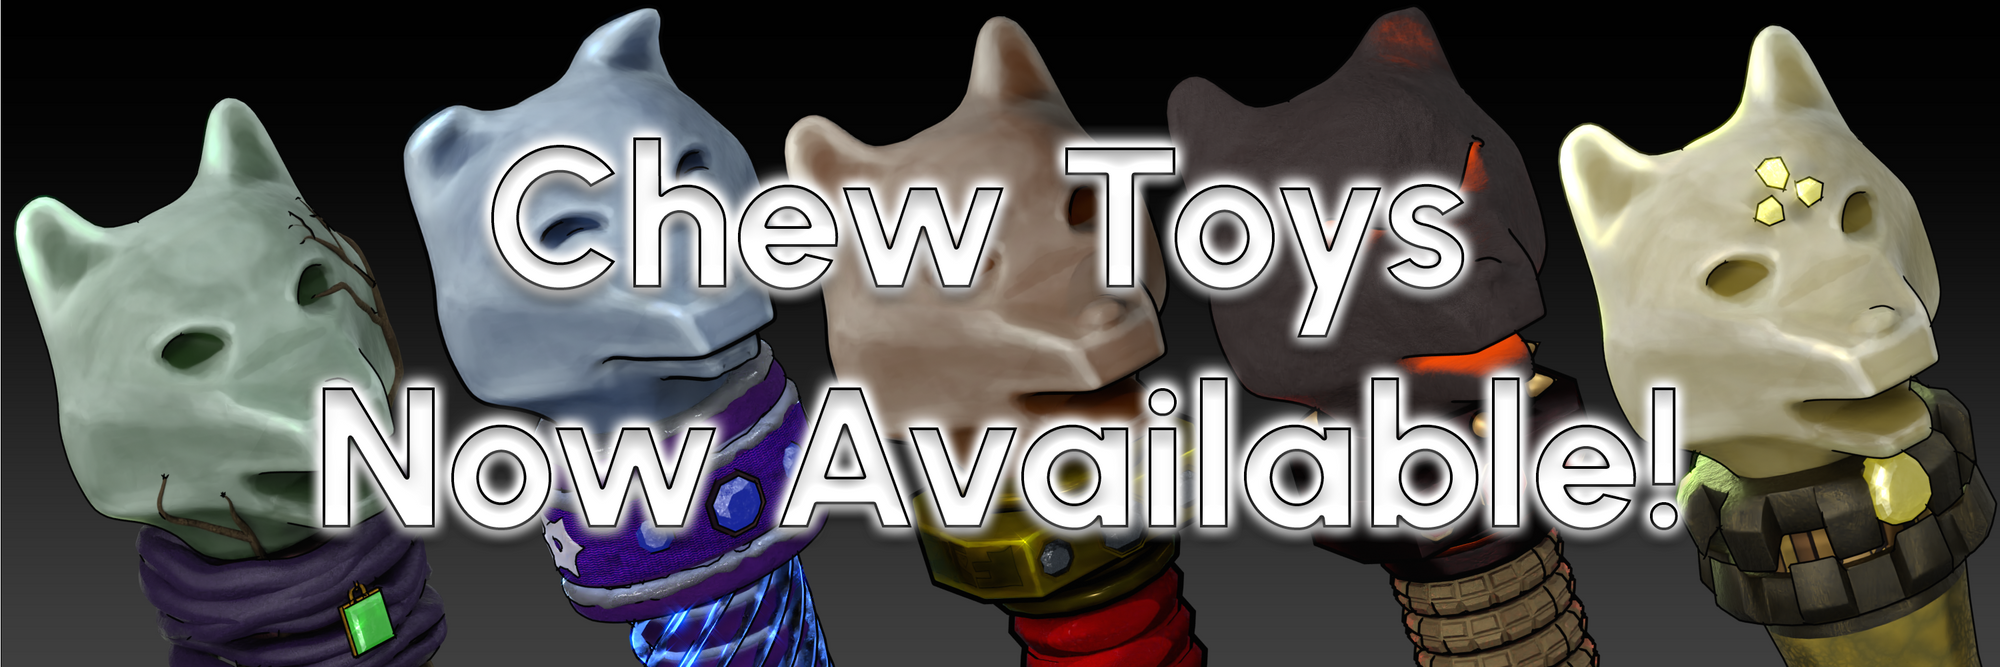 Chew Toys Now Available!